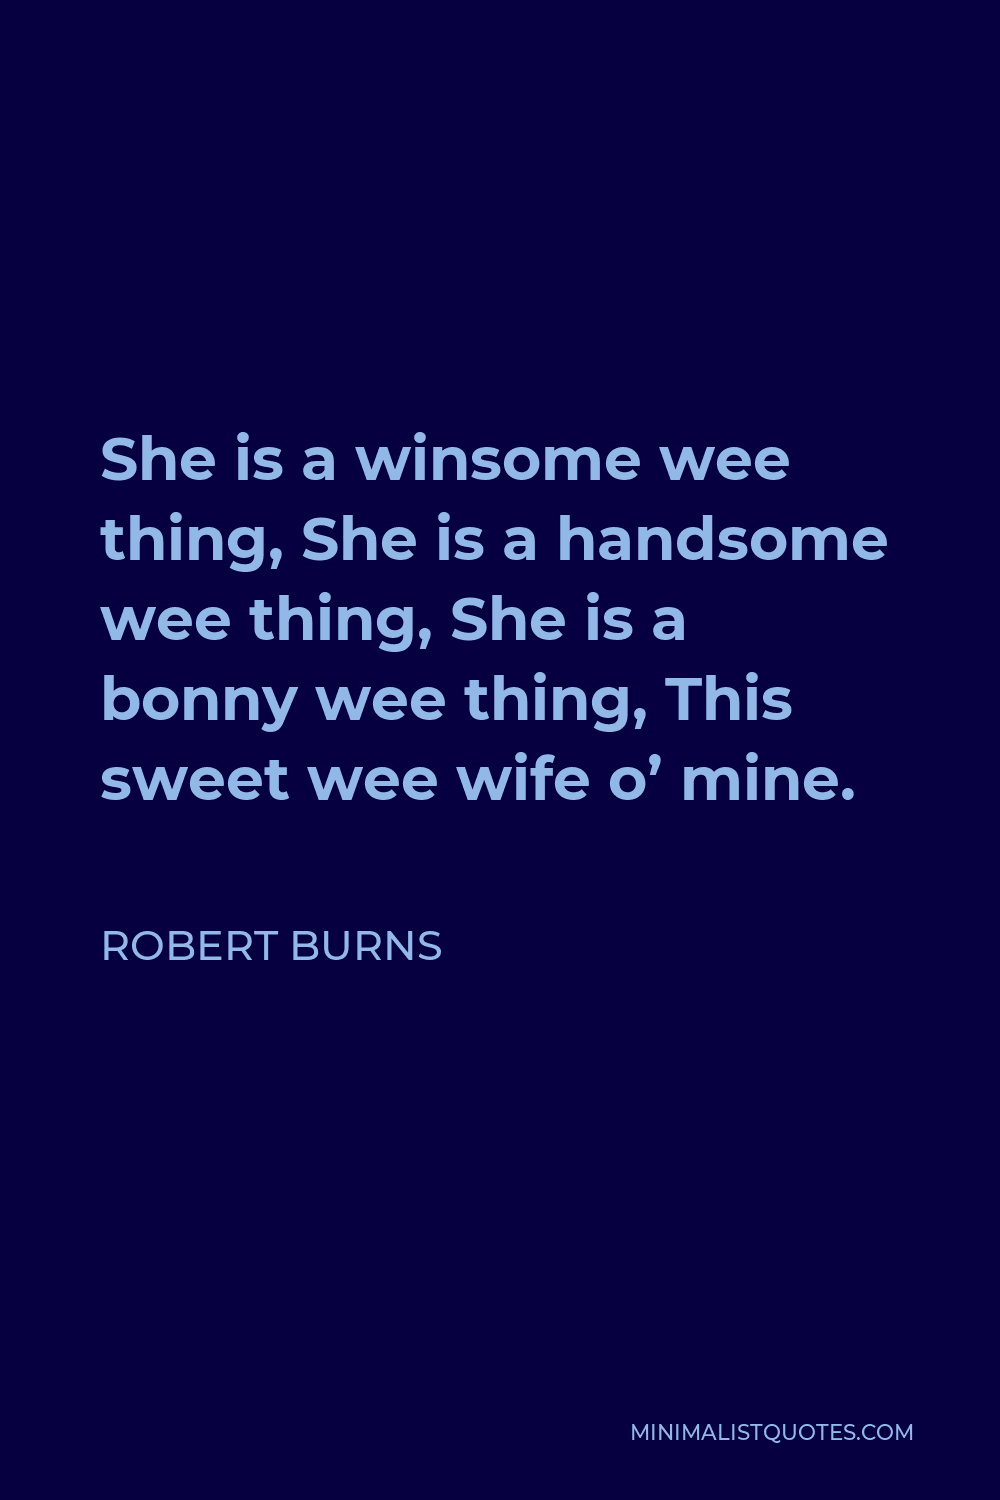 Robert Burns Quote - She is a winsome wee thing, She is a handsome wee thing, She is a bonny wee thing, This sweet wee wife o’ mine.